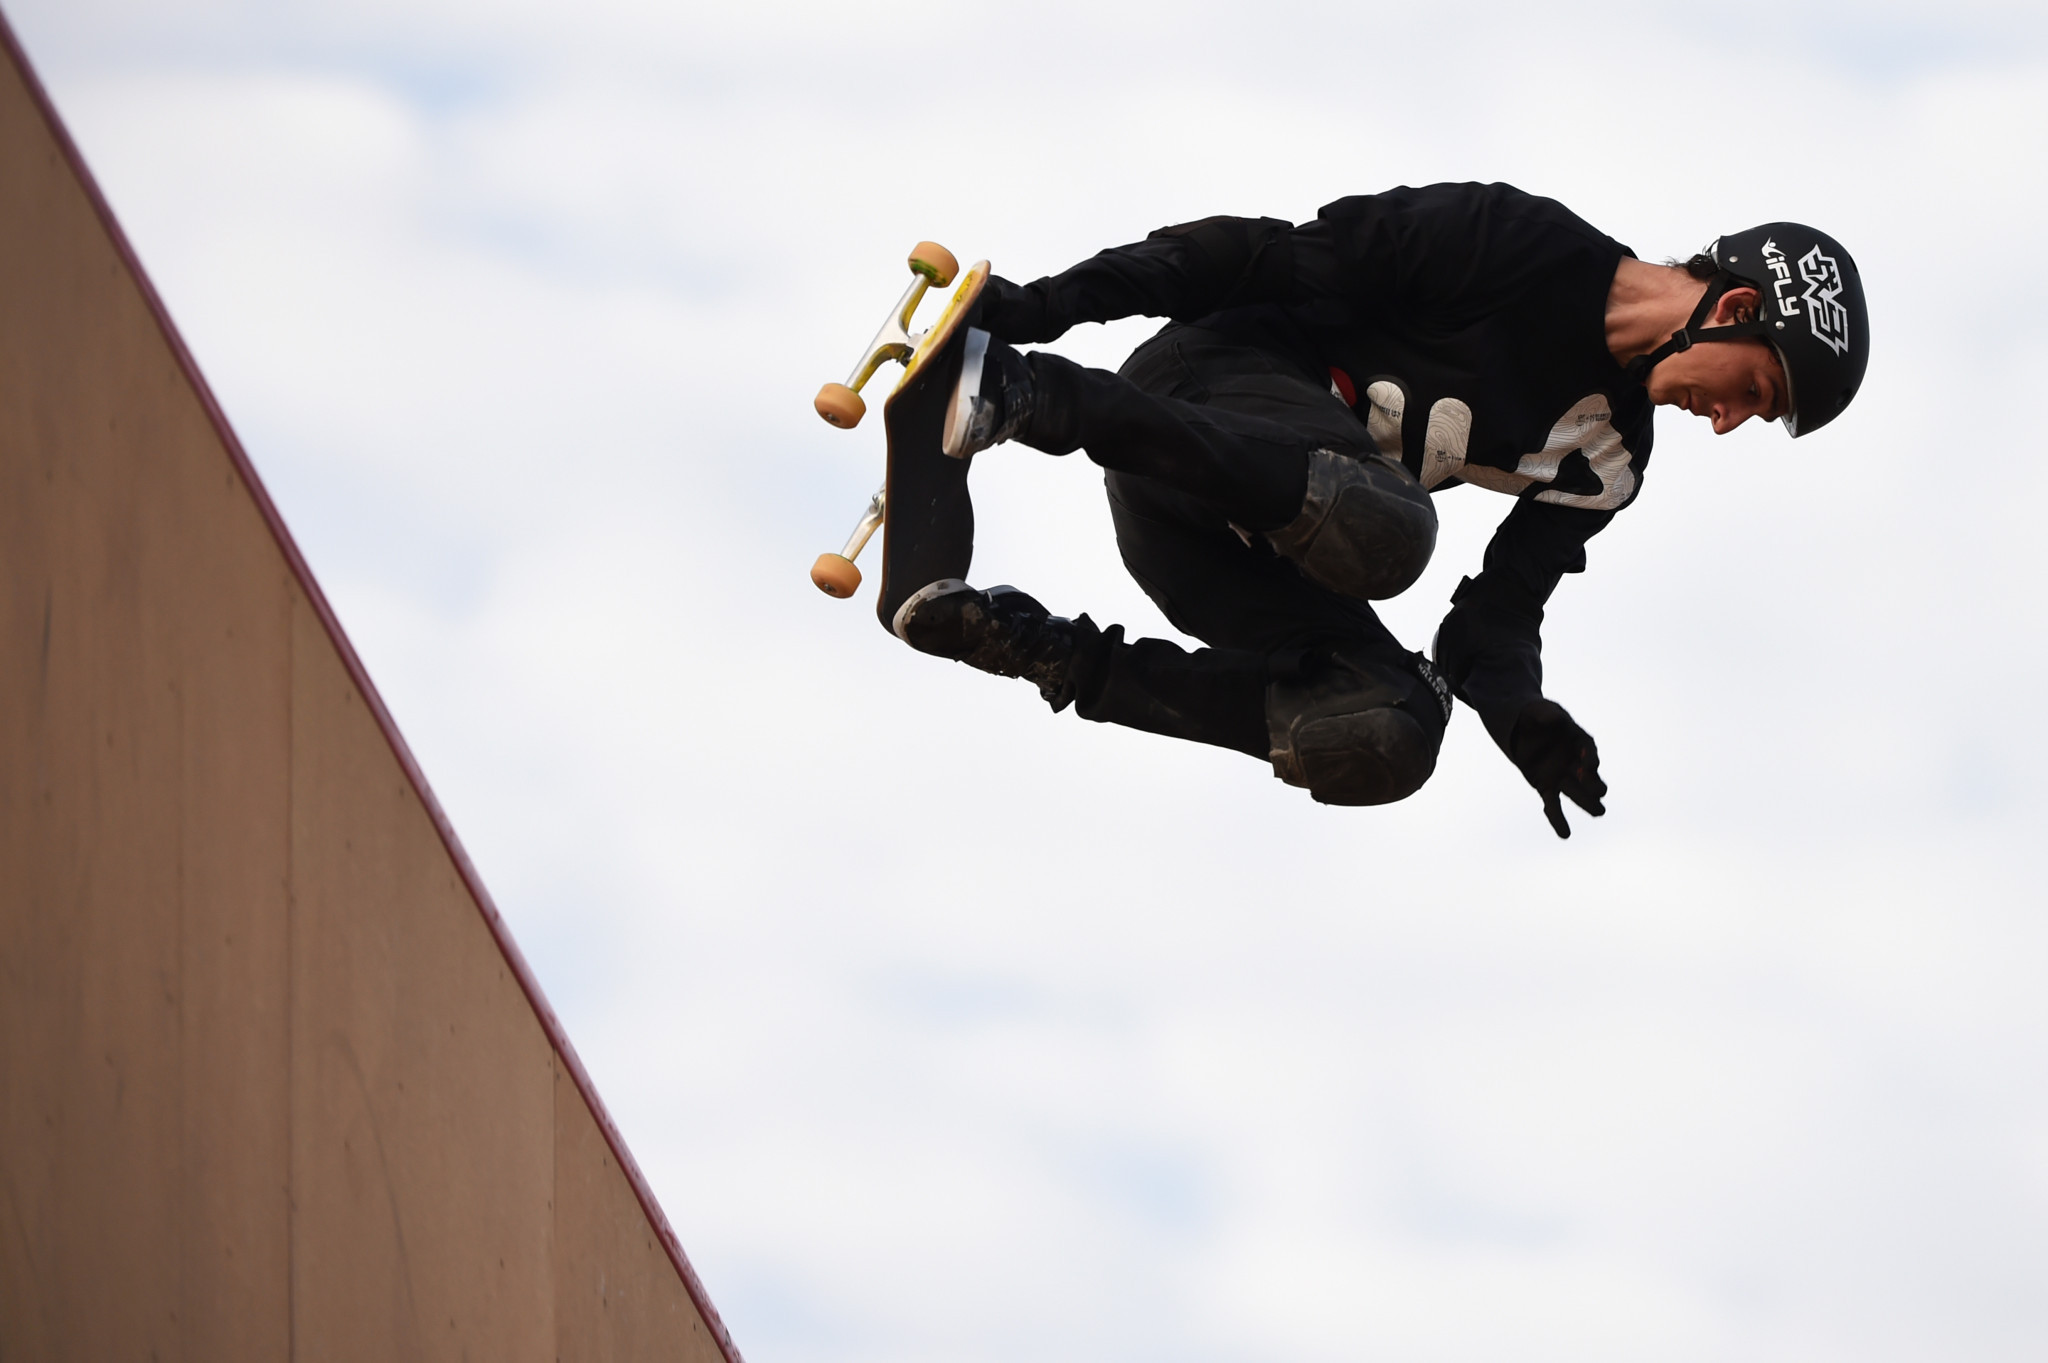 Olympic medallists and Japanese riders victorious at X Games in Chiba